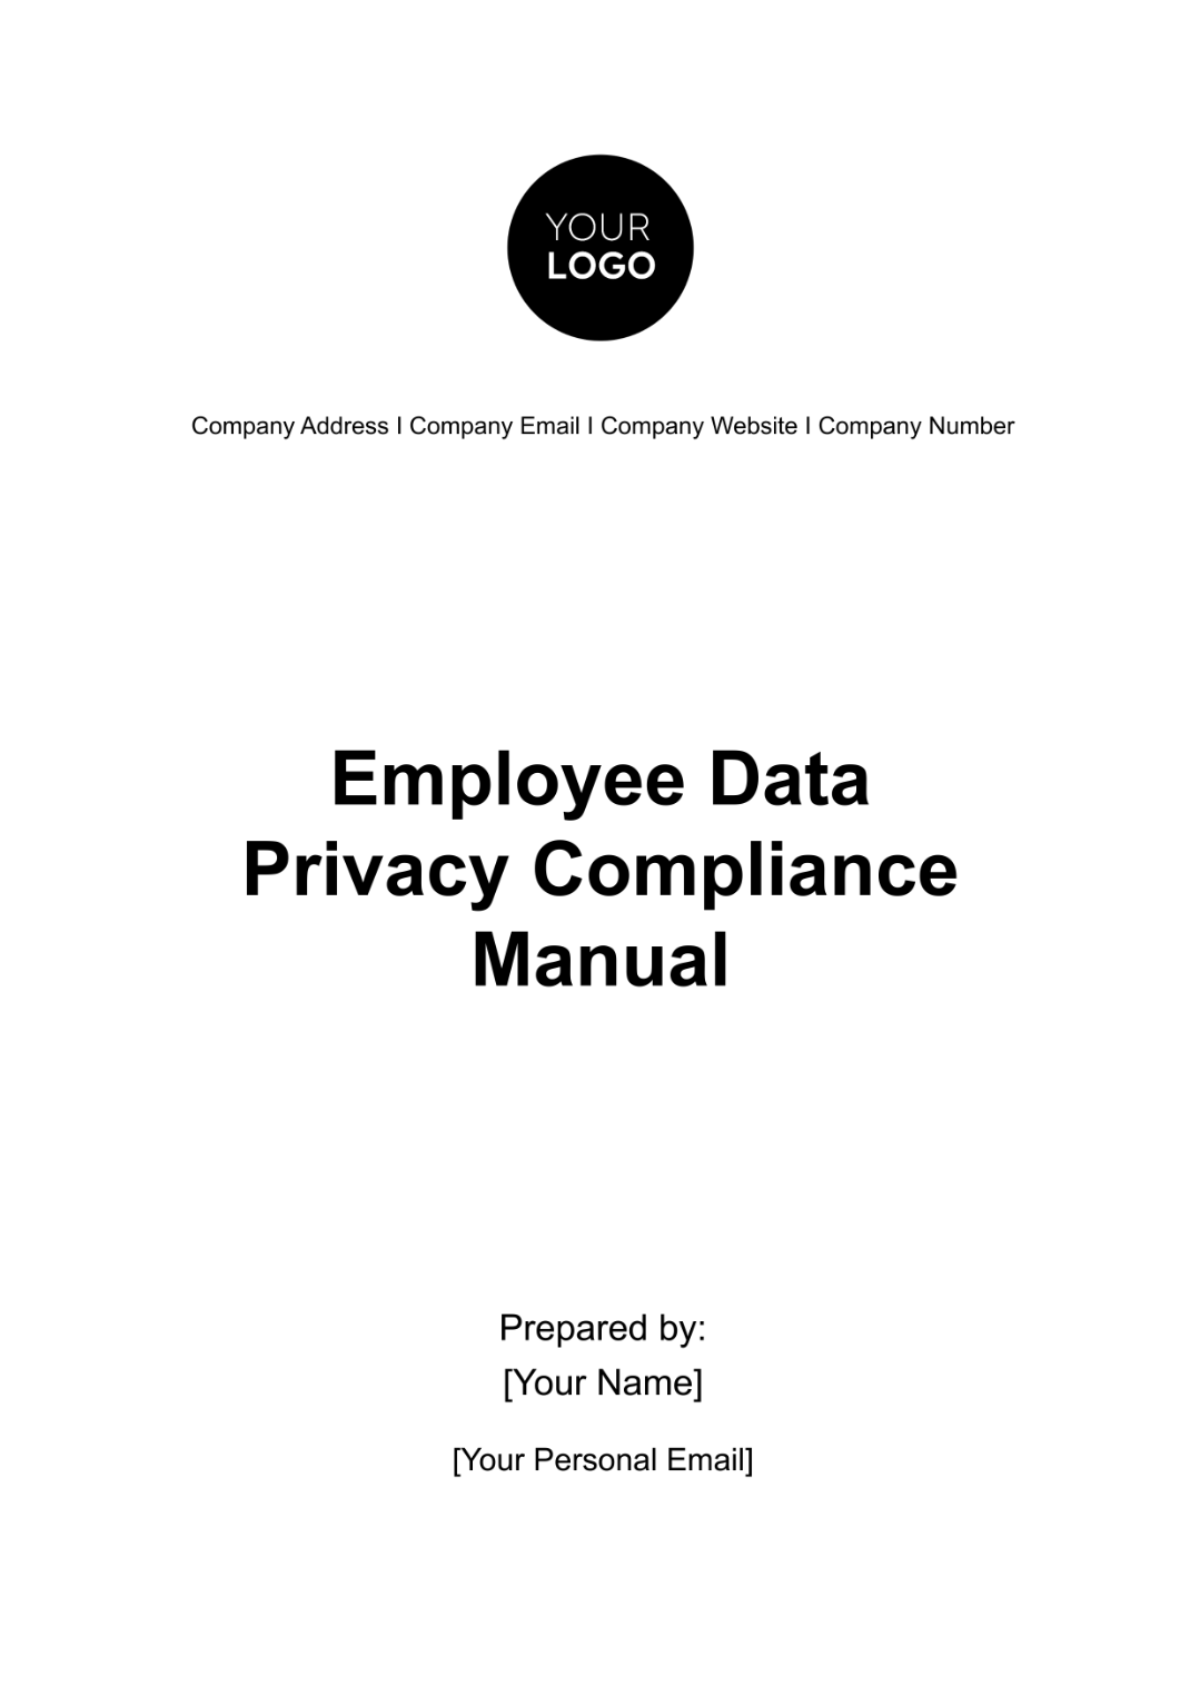 Free Employee Data Privacy Compliance Manual HR Template